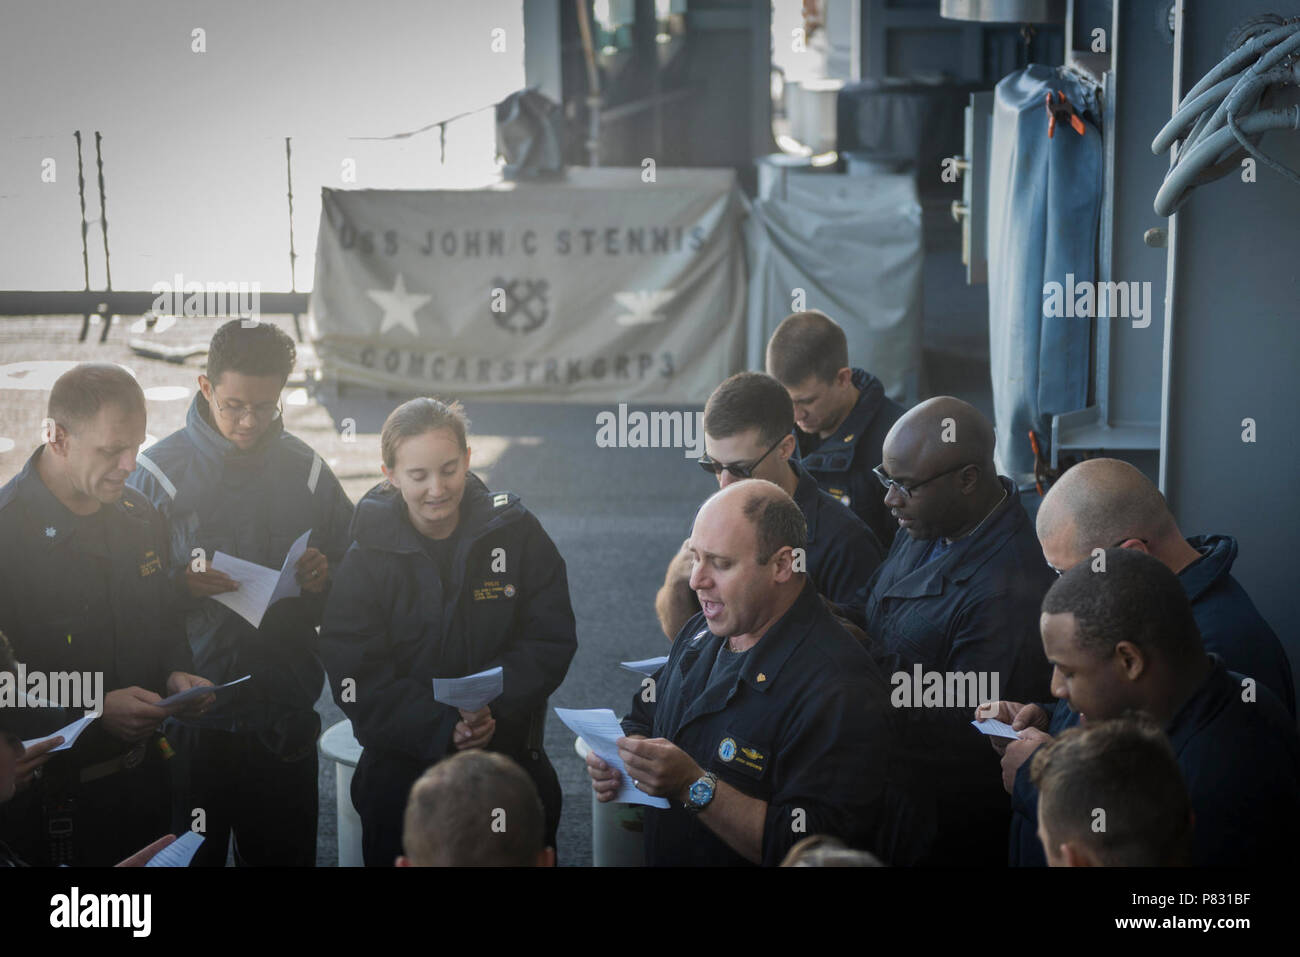 PACIFIC OCEAN (Oct. 3, 2016) Lt. Josh Sherwin, a Navy chaplain, leads a Rosh Hashanah ceremony on USS John C. Stennis' (CVN 74) fantail. Rosh Hashanah is a two-day celebration of the Jewish New Year and provides the opportunity to reflect on the past year and look ahead in the New Year. Sherwin, one of ten rabbis in the Navy, visited John C. Stennis at sea to provide religious services for the crew during the High Holy Days. John C. Stennis is underway conducting proficiency and sustainment training. Stock Photo